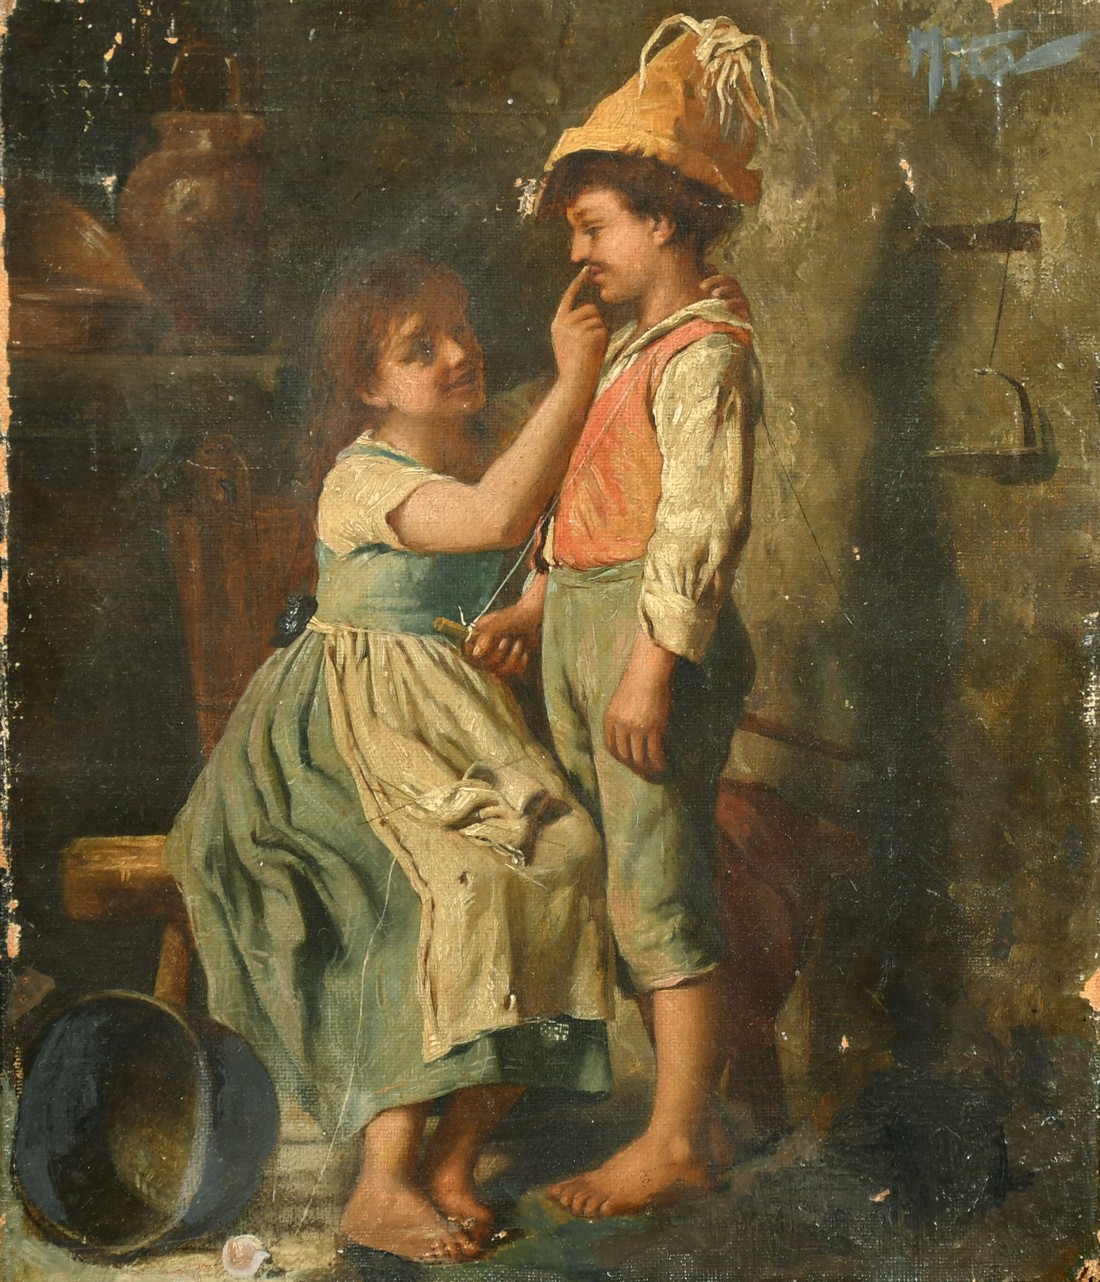 Mid-19th Century Italian School, two children playing in a cottage interior, oil on canvas, 9" x 7.